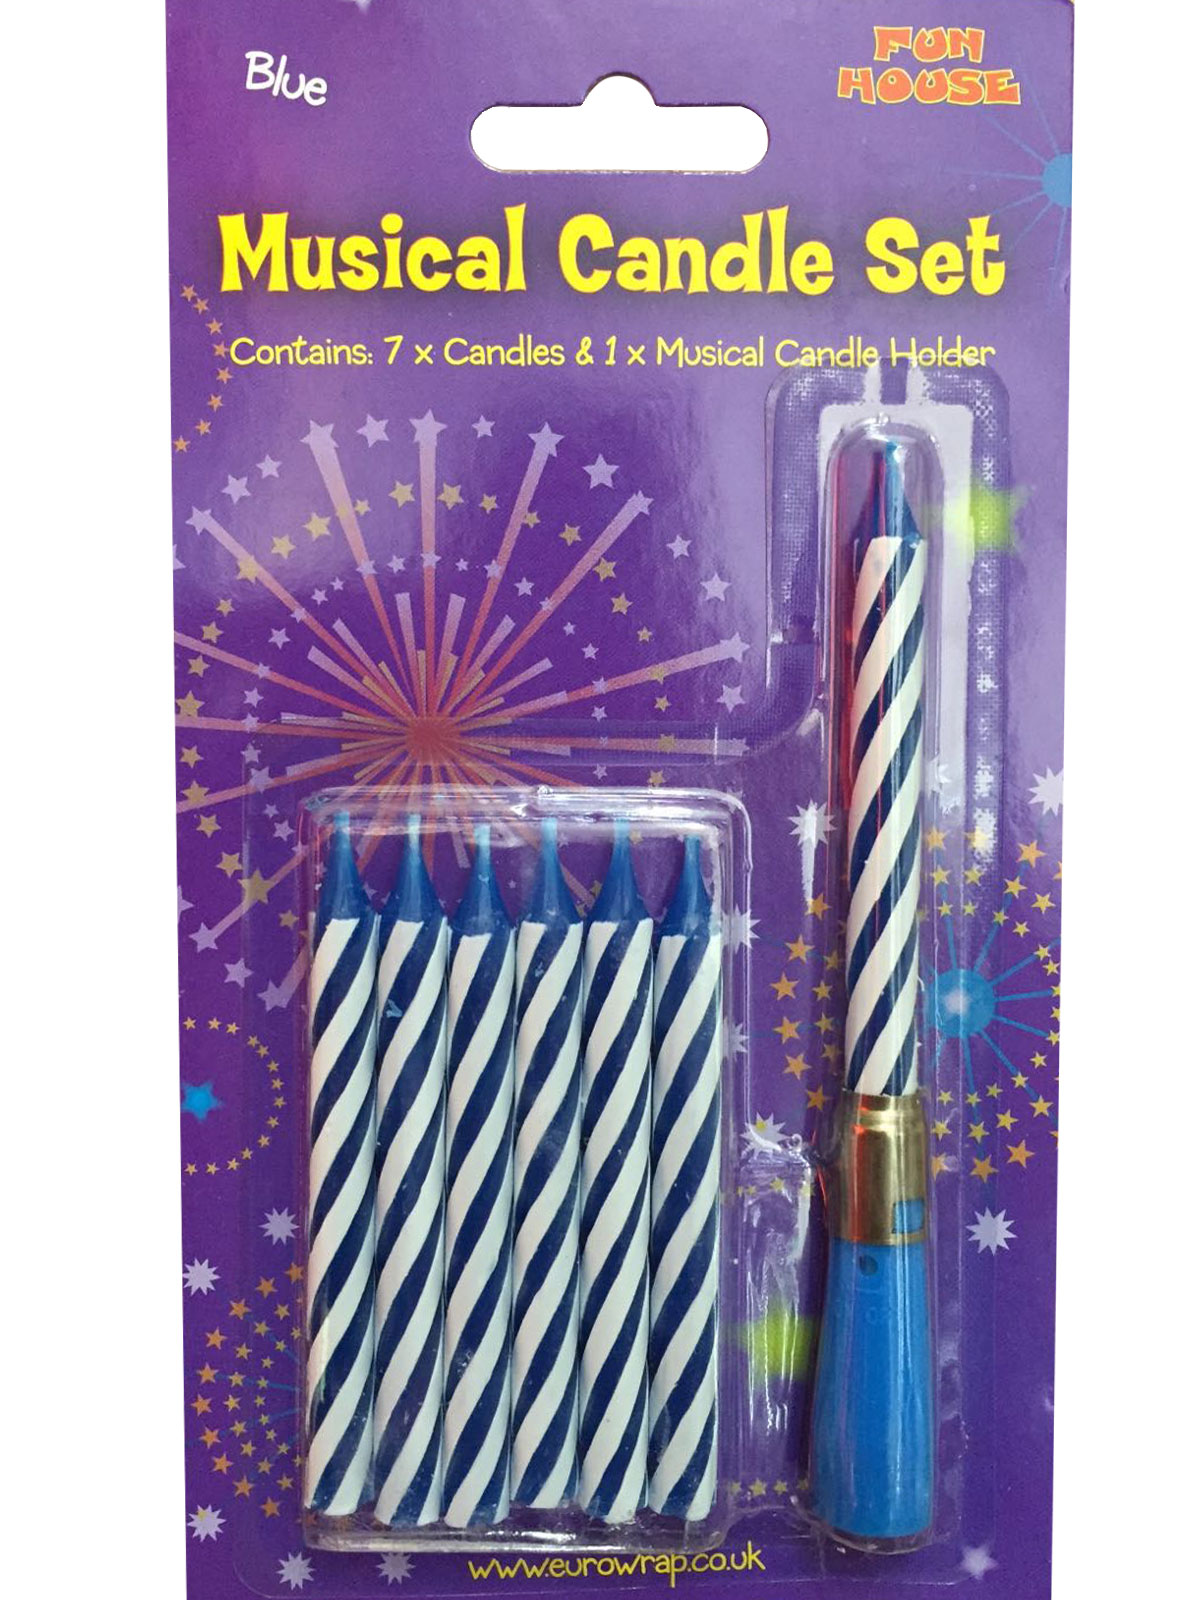 Blue Musical Candle Set